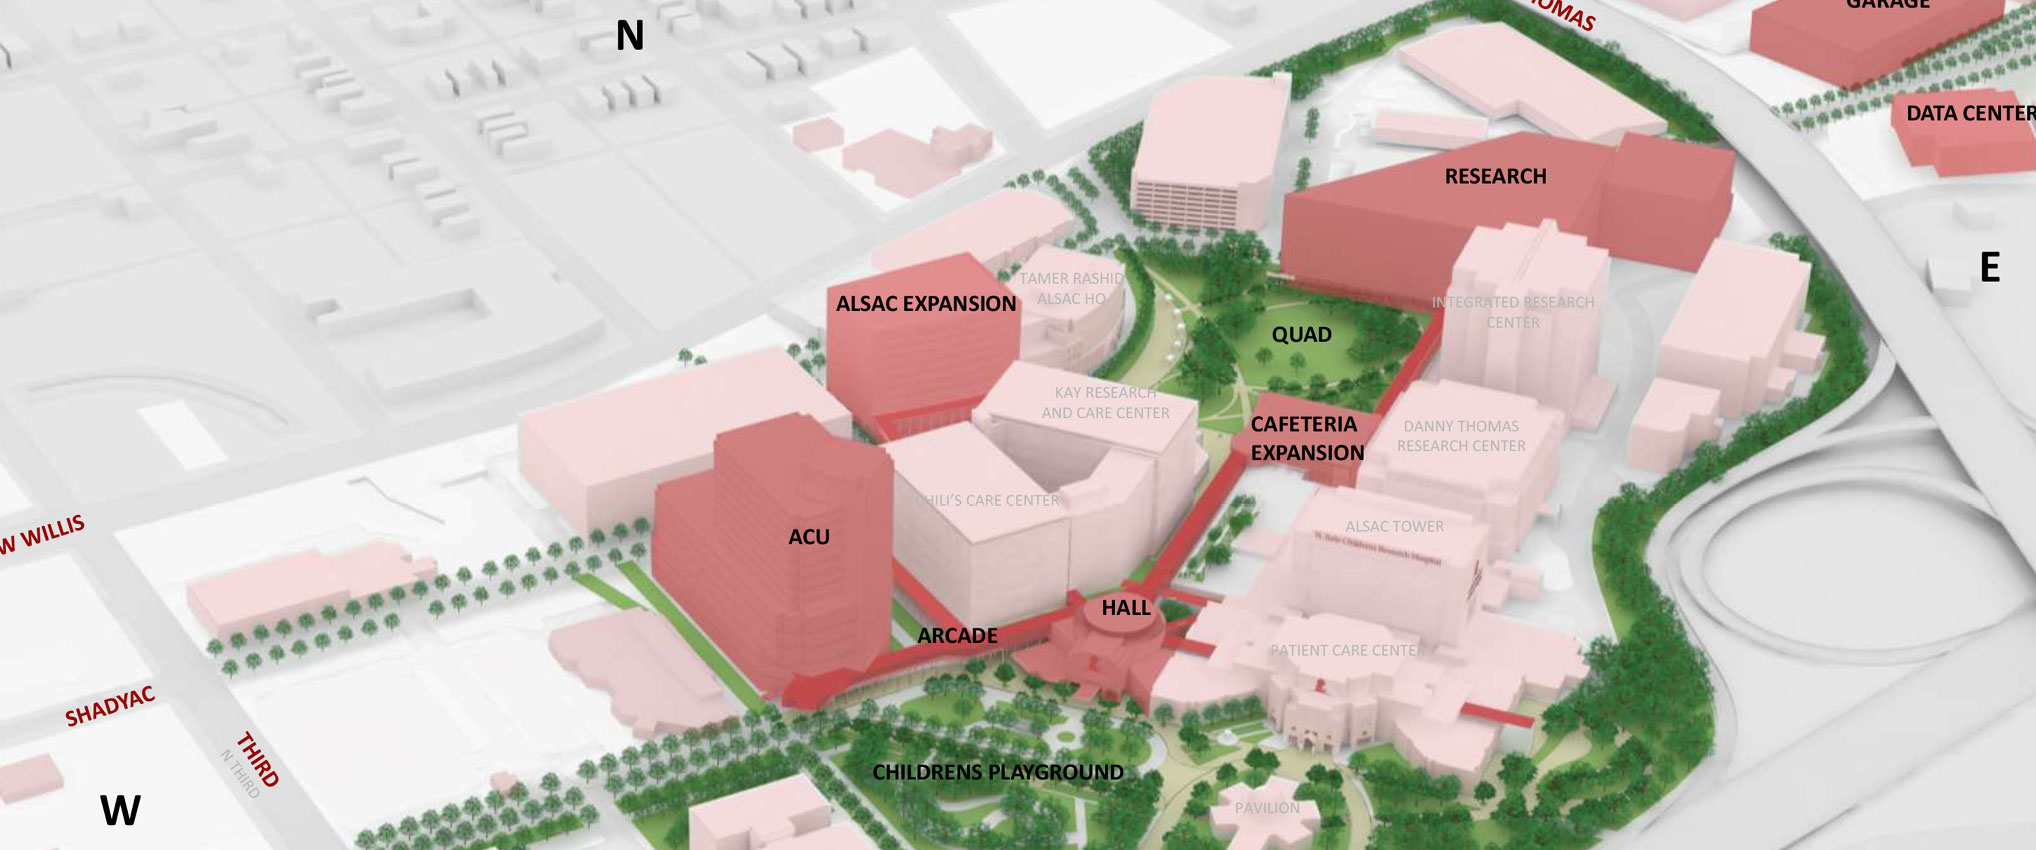 St. Jude Children’s Research Hospital Master Site & Facilities Plan